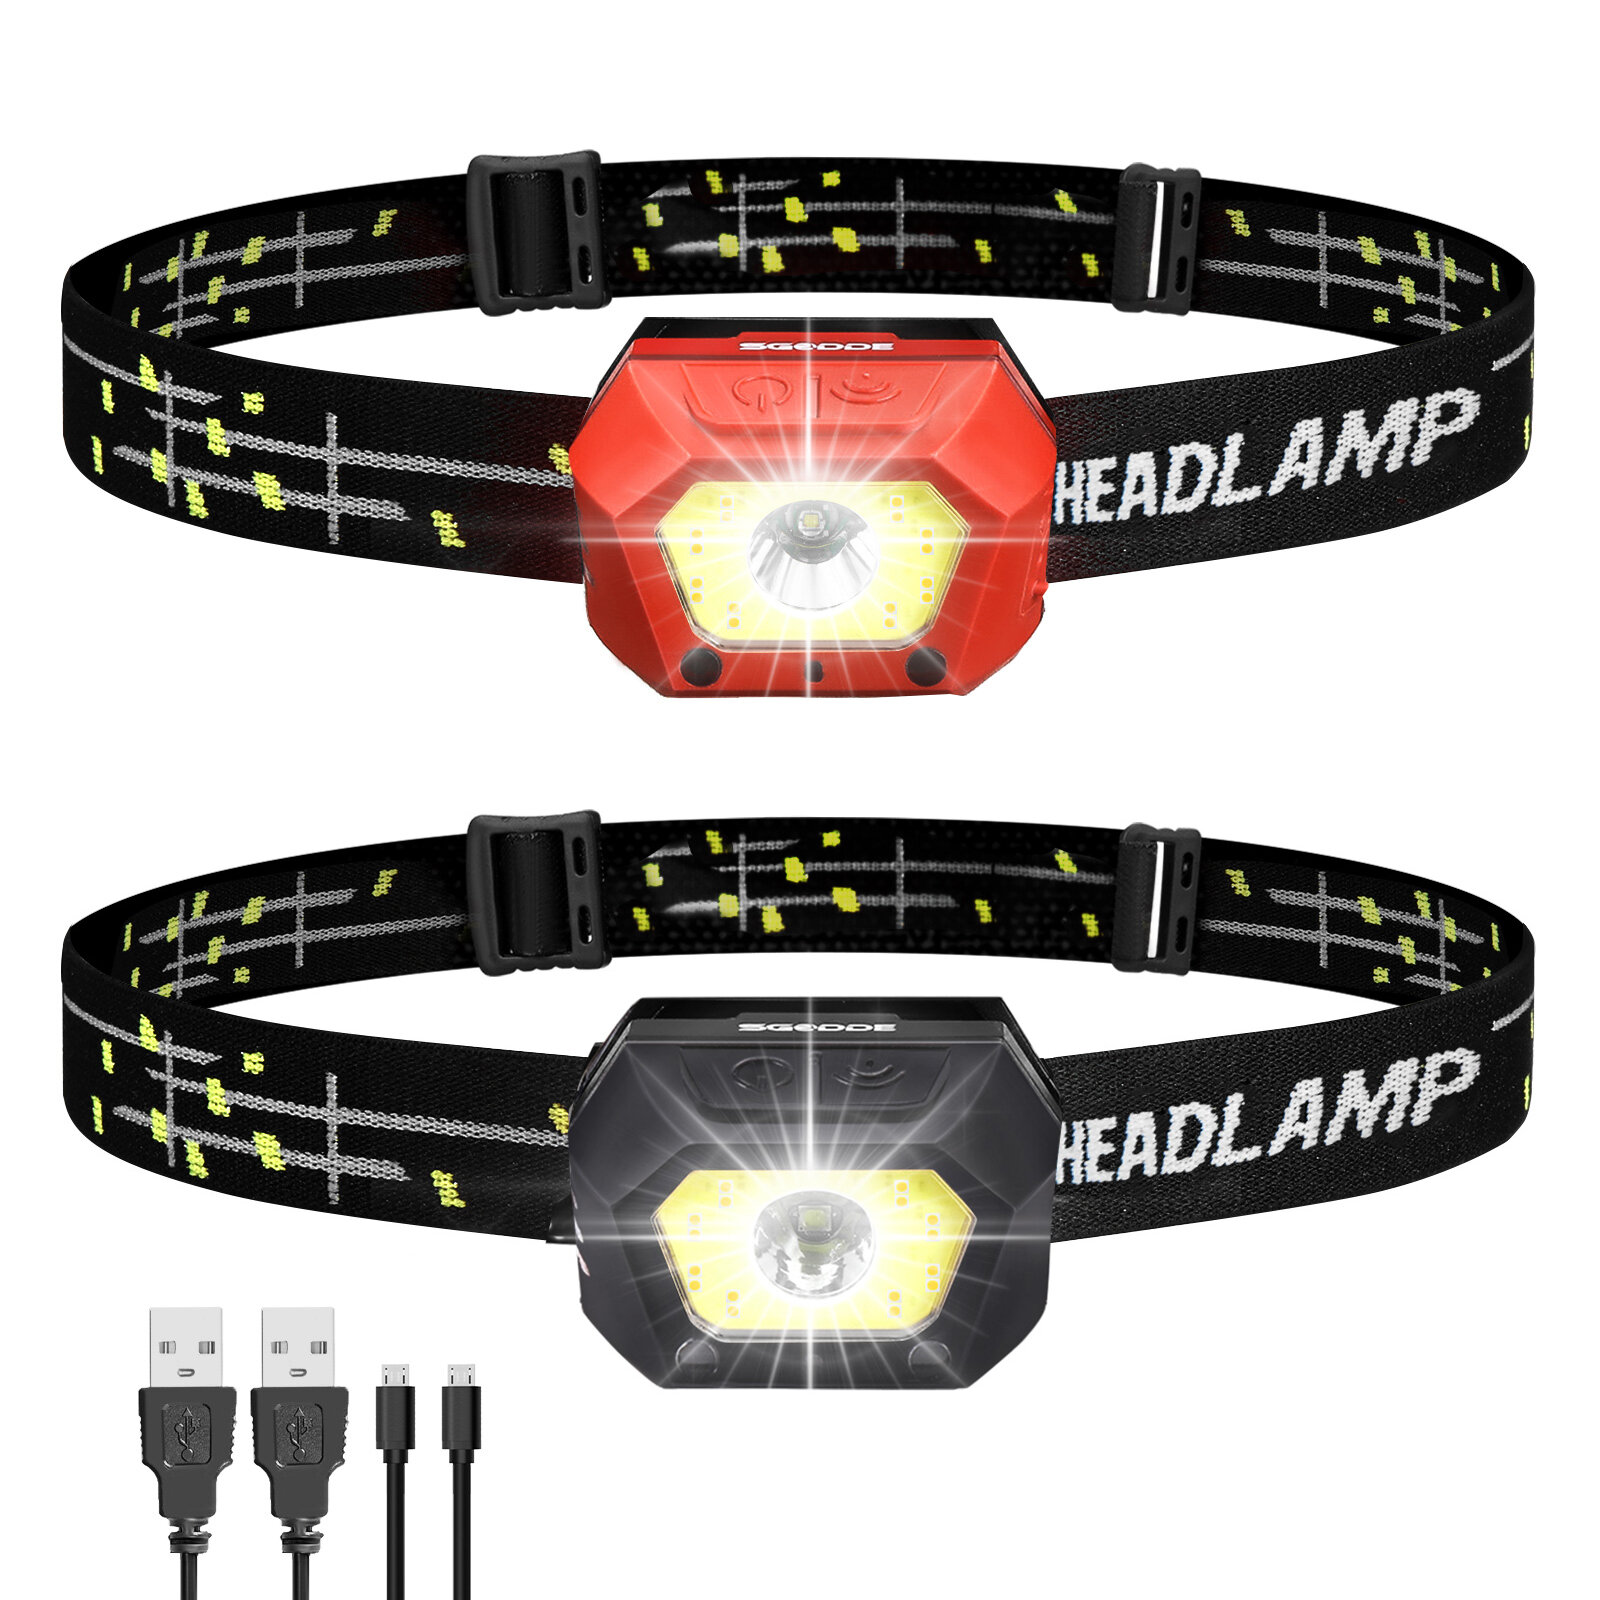 SGODDE 2PCS Five Modes Induction Headlamp USB Rechargeable Adjustable IPX65 Waterproof Outdoor Cycling Climbing Lighting